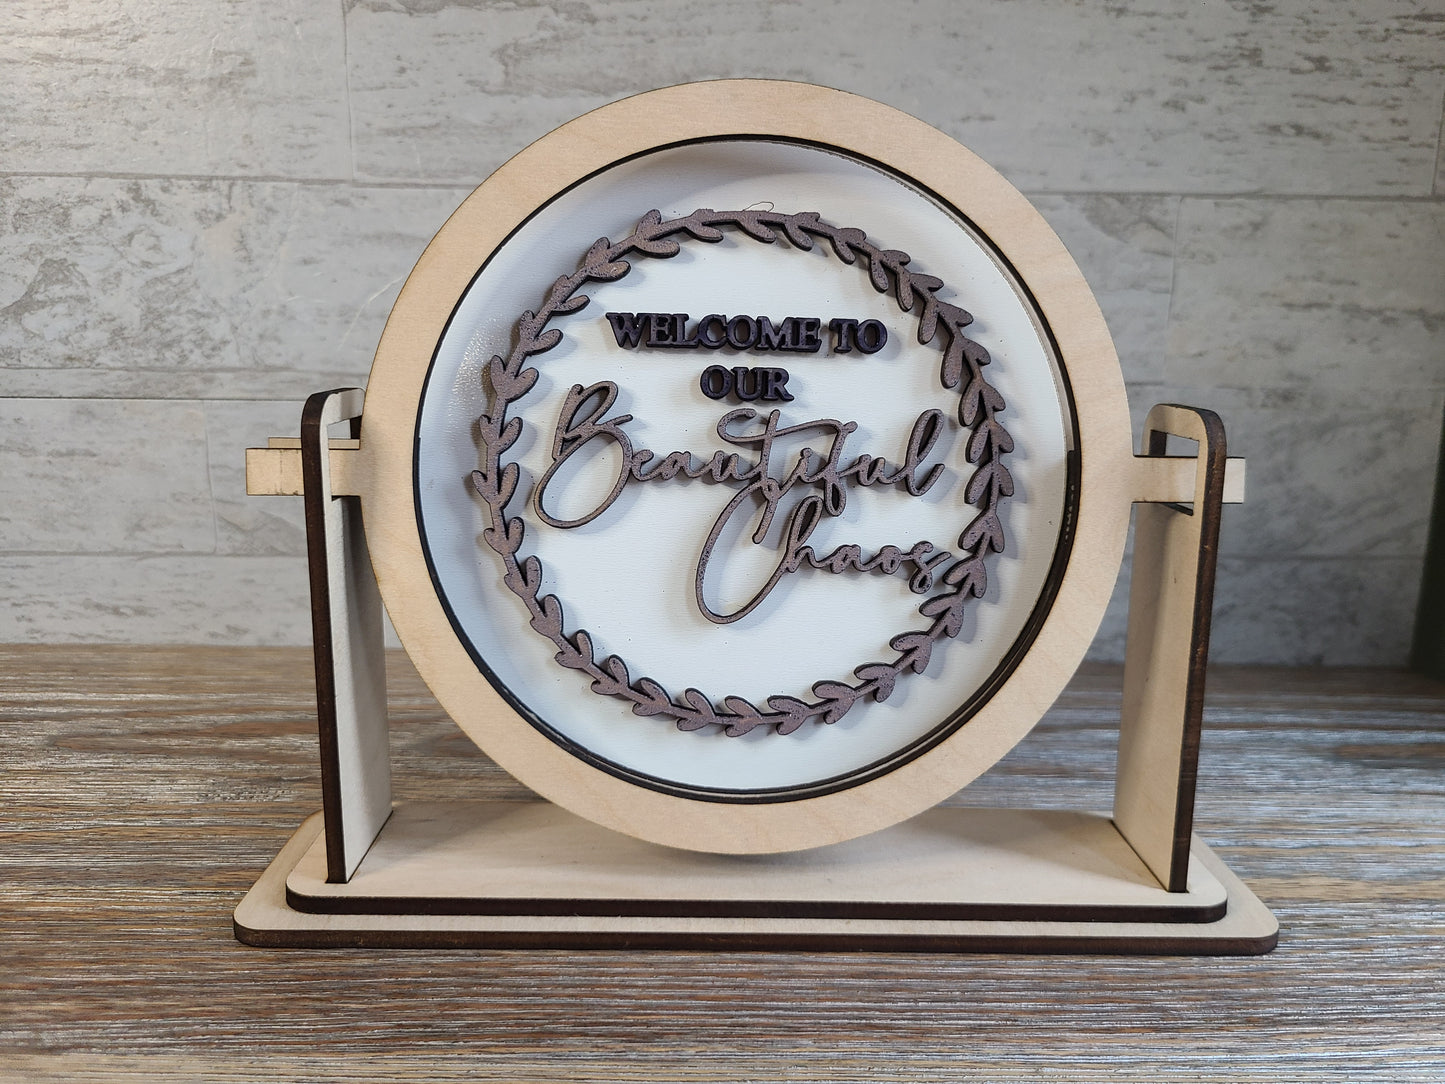 Our Beautiful Chaos Sign with or without Interchangeable Tabletop Sign Holder